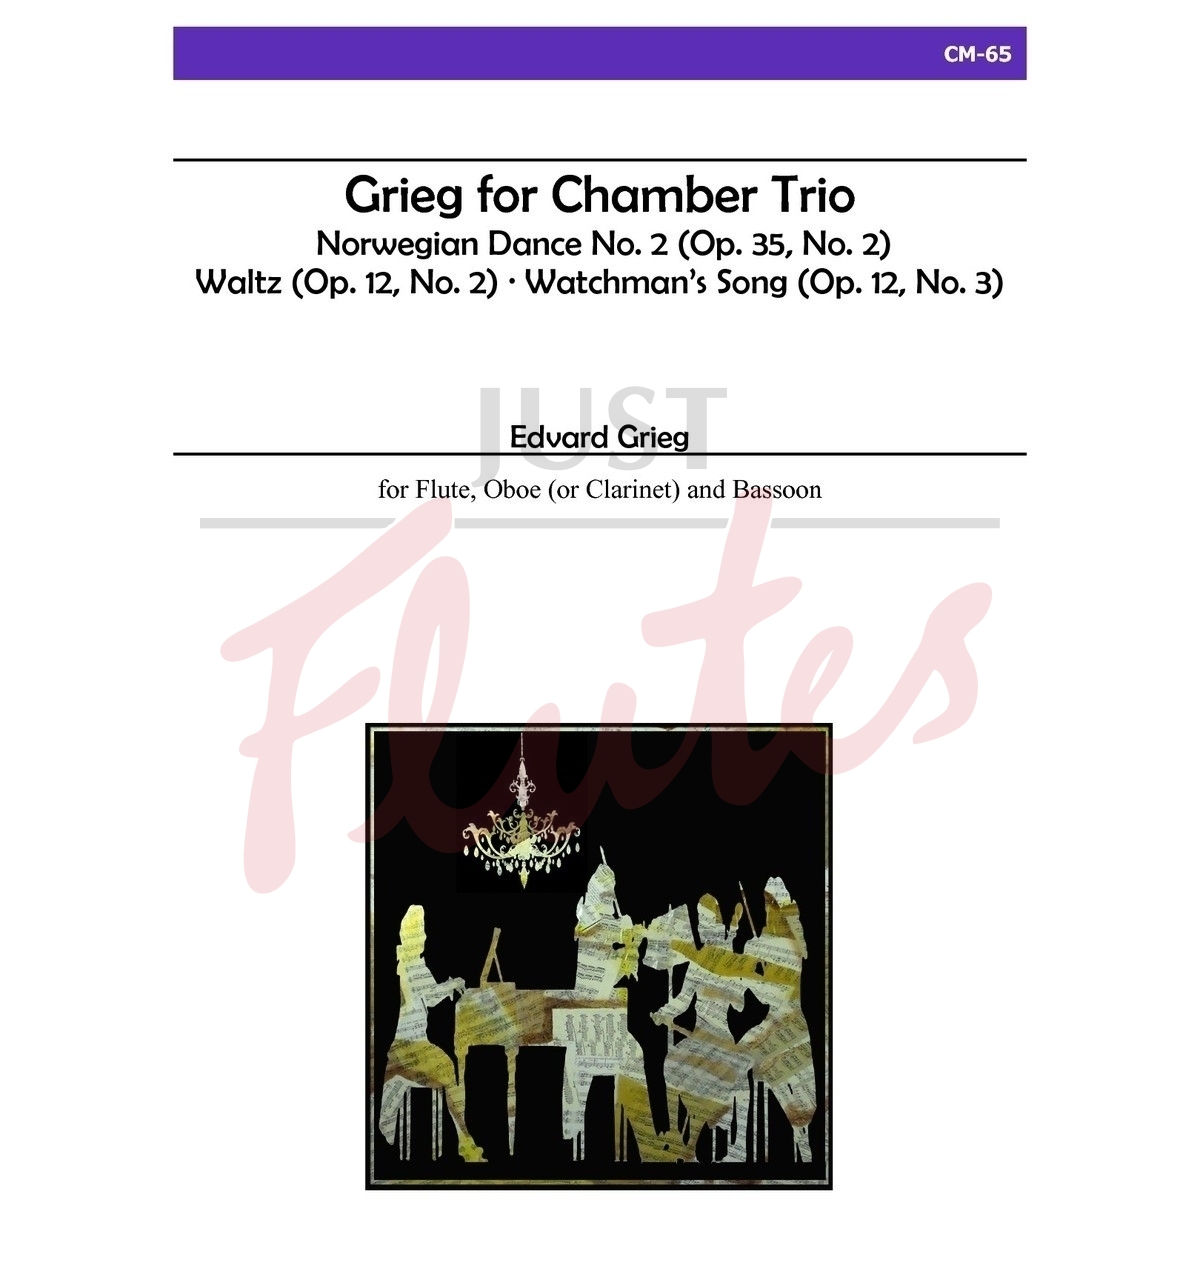 Grieg for Chamber Trio